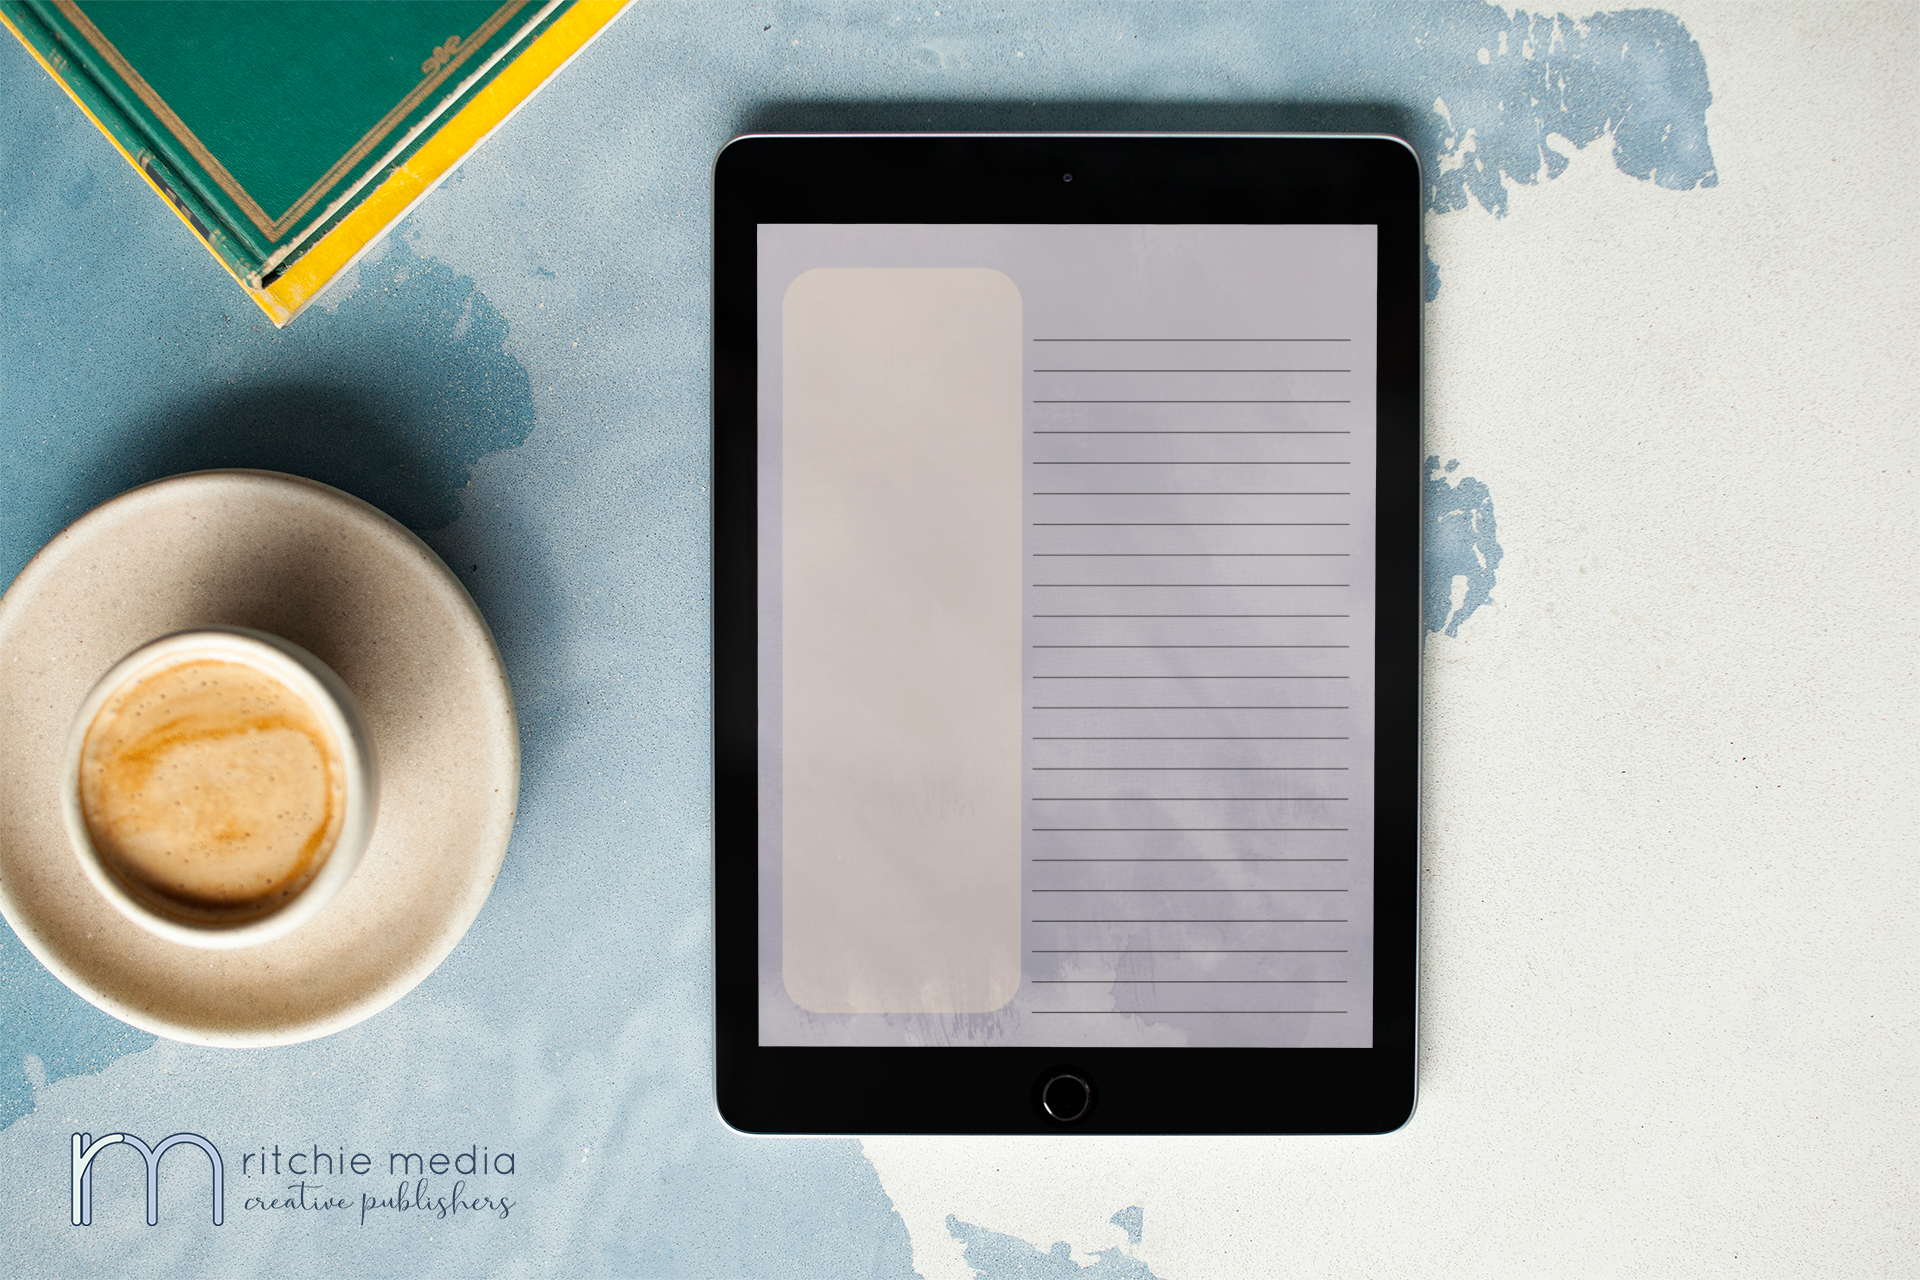 space-gray-ipad-mockup-over-a-watercolor-background-22612 copy